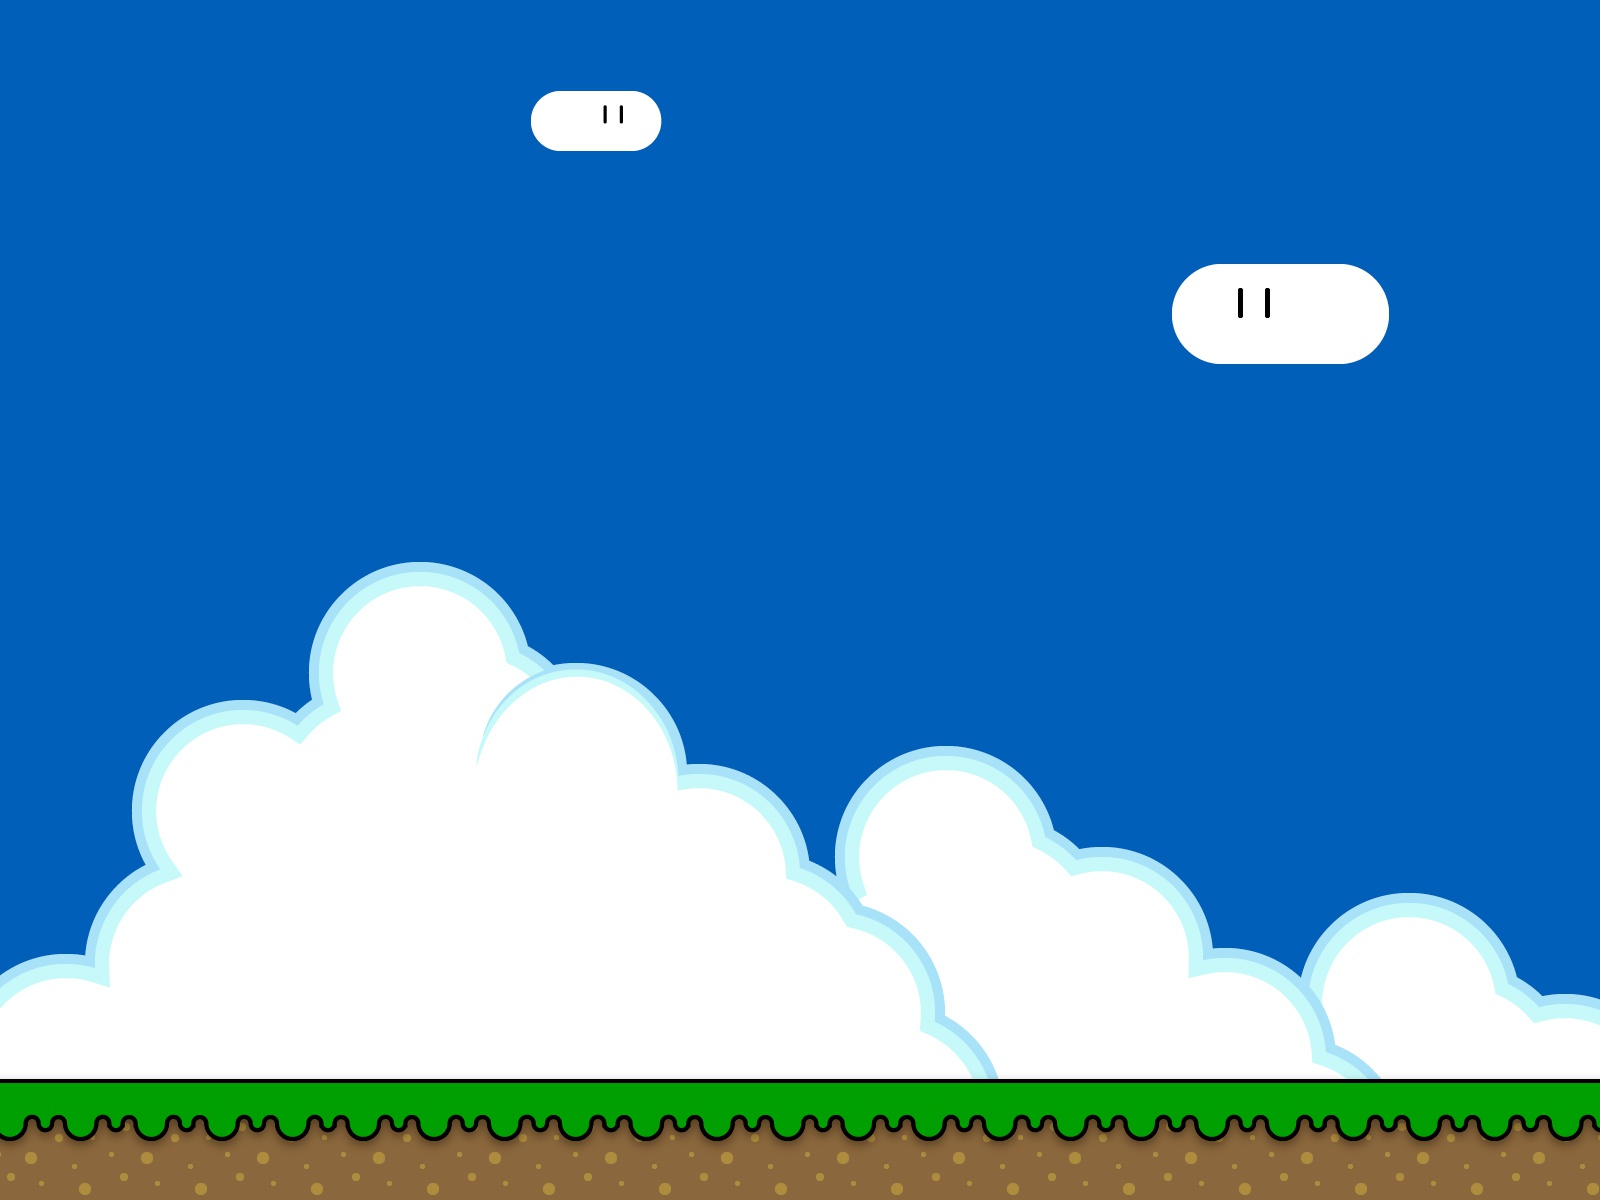 Super mario background by tim hykes on